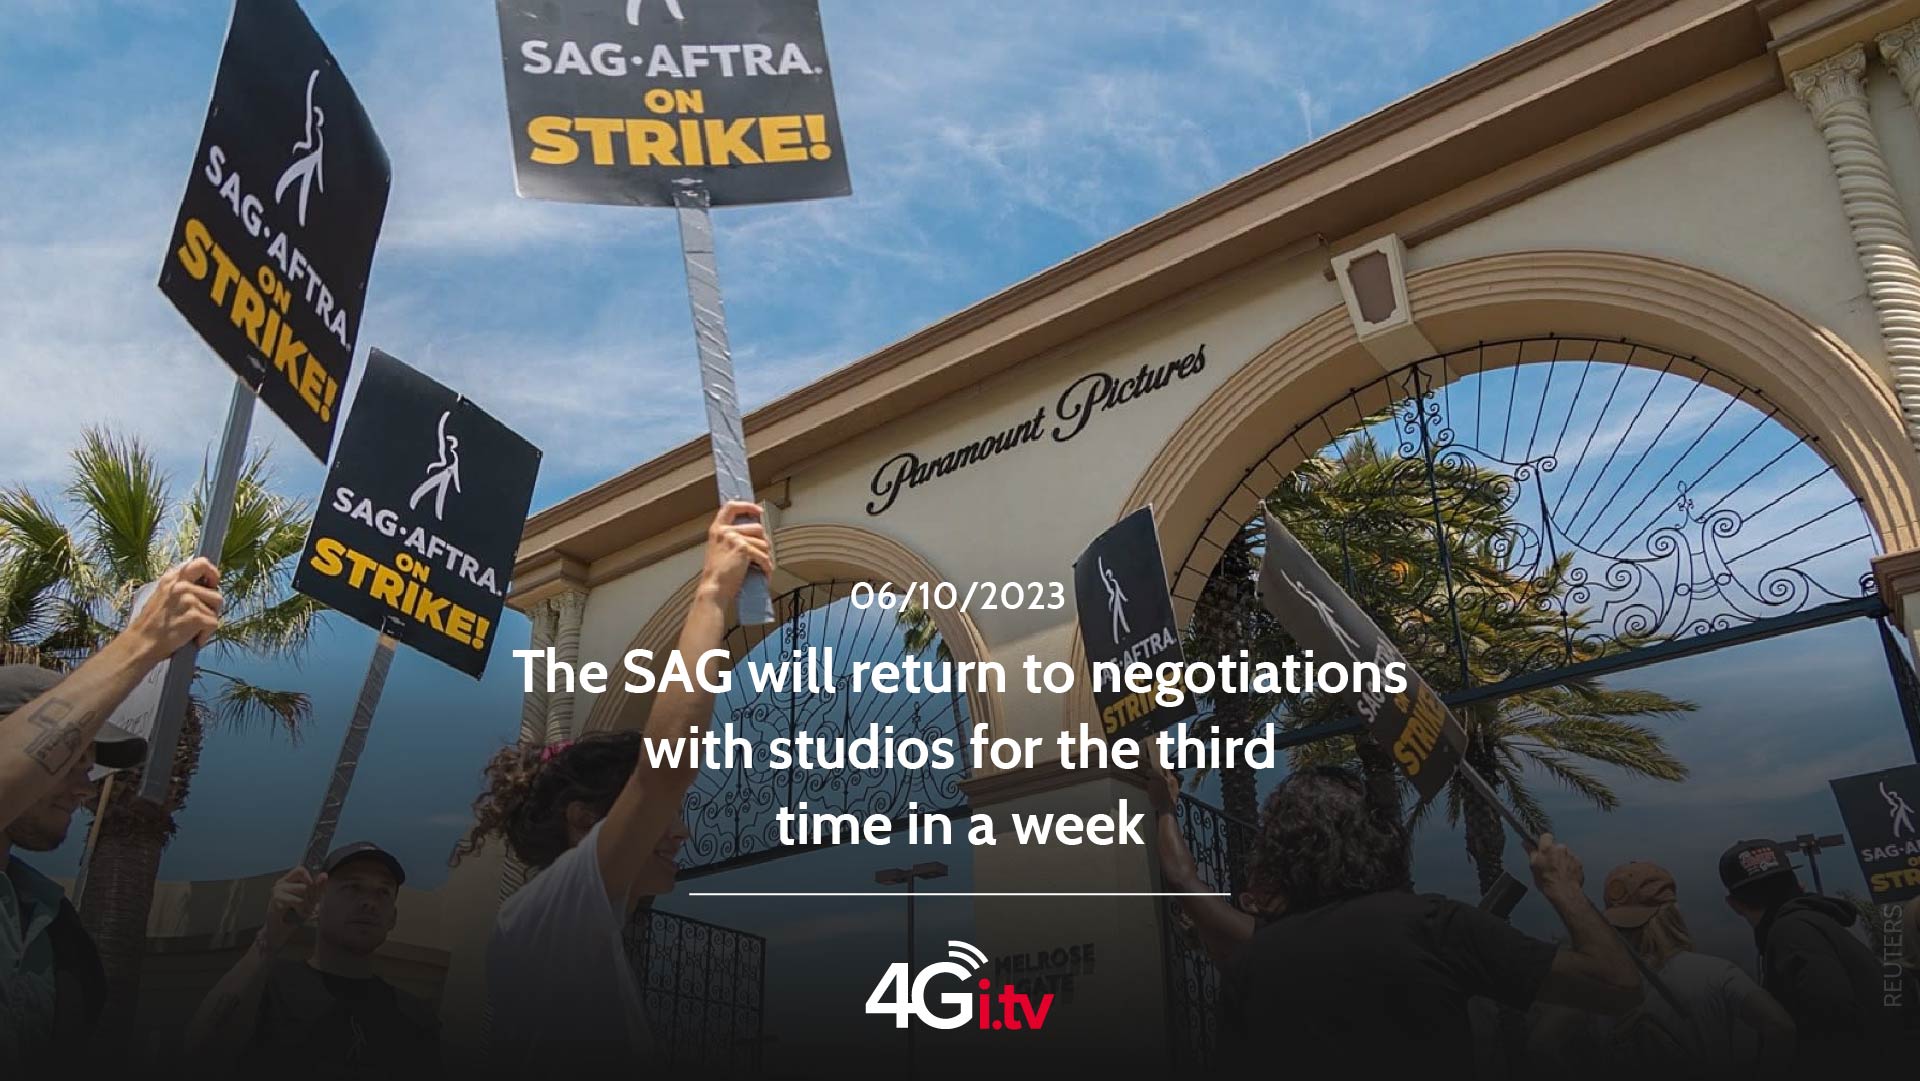 Подробнее о статье The SAG will return to negotiations with studios for the third time in a week